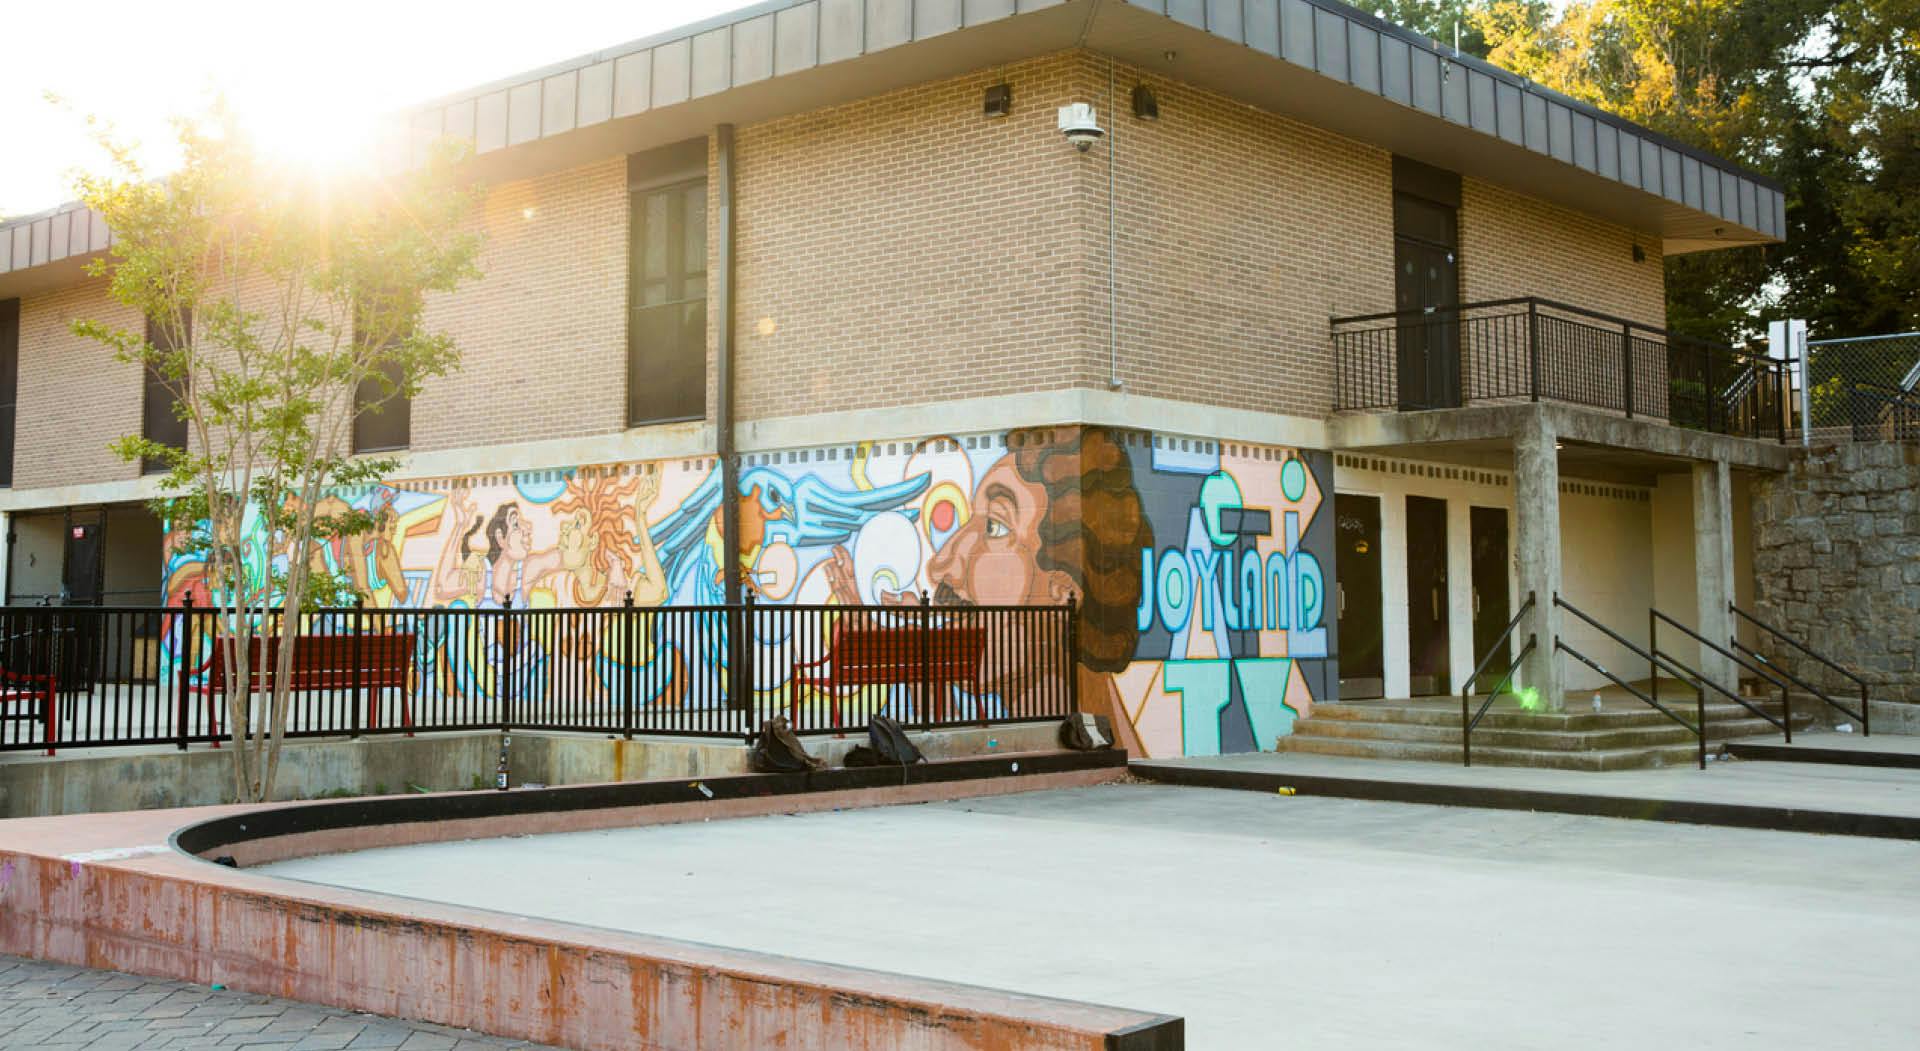 A skate park in front of a building that features a colorful mural honoring the Joyland neighborhood.